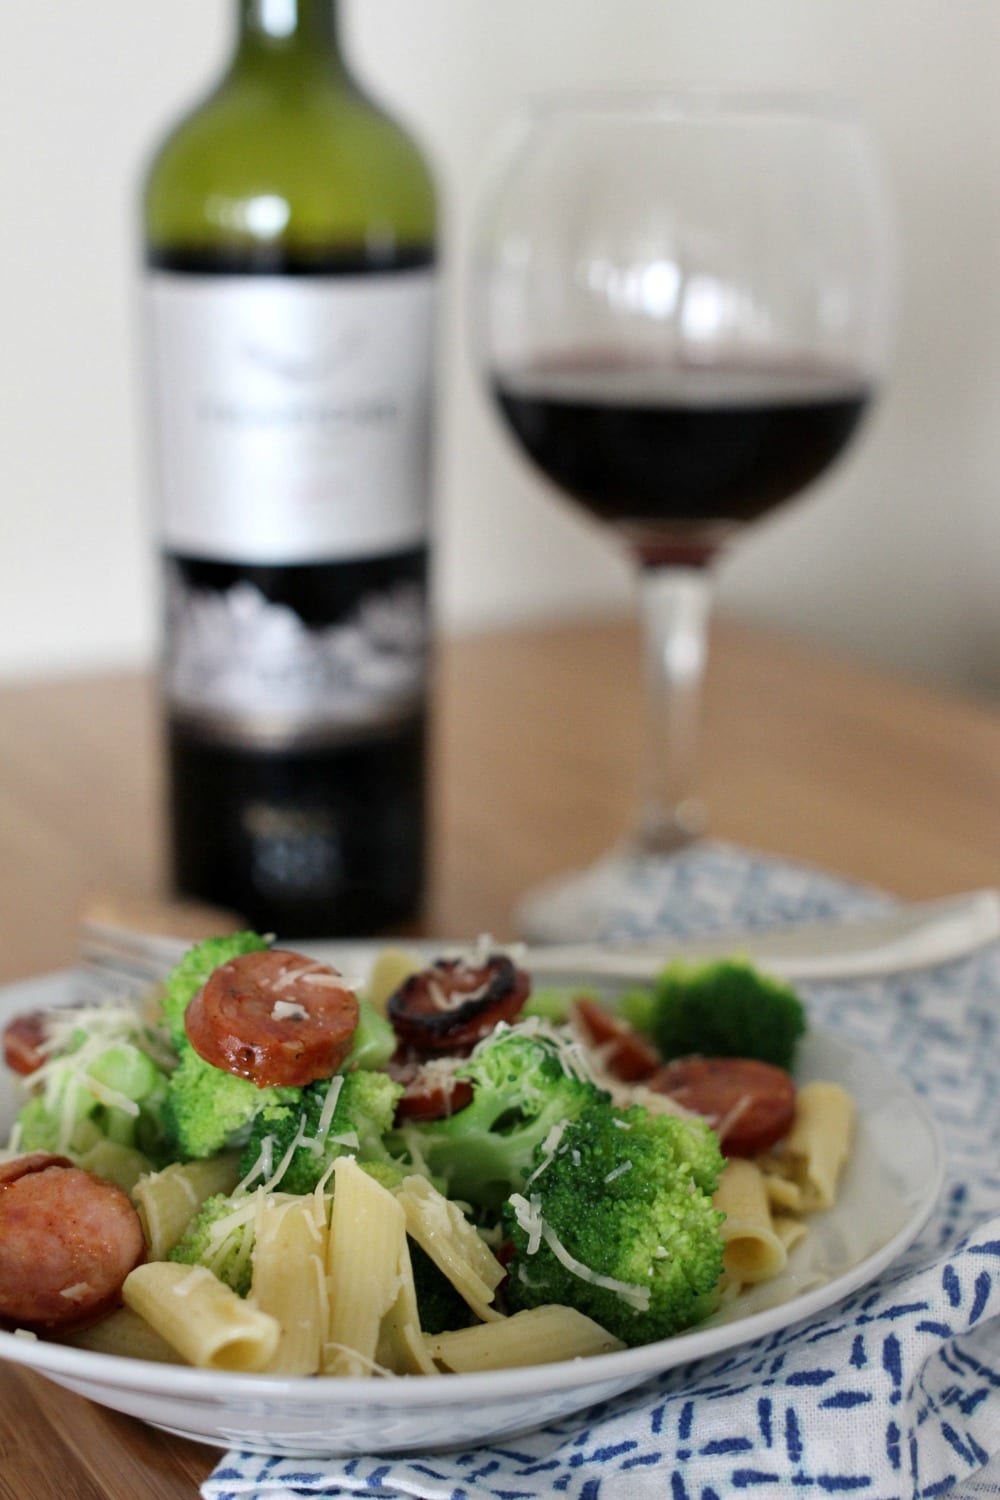 Looking for smoked sausage recipes for an easy and quick summer meal? I have just the one for you: Smoked Sausage, Broccoli and Pasta. With low prep, little time in the kitchen and a dish bursting with flavor, you'll have more time to savor your summer. This meal only requires one skillet and one pot to cook the pasta and broccoli in, so that means less dishes for clean-up. 